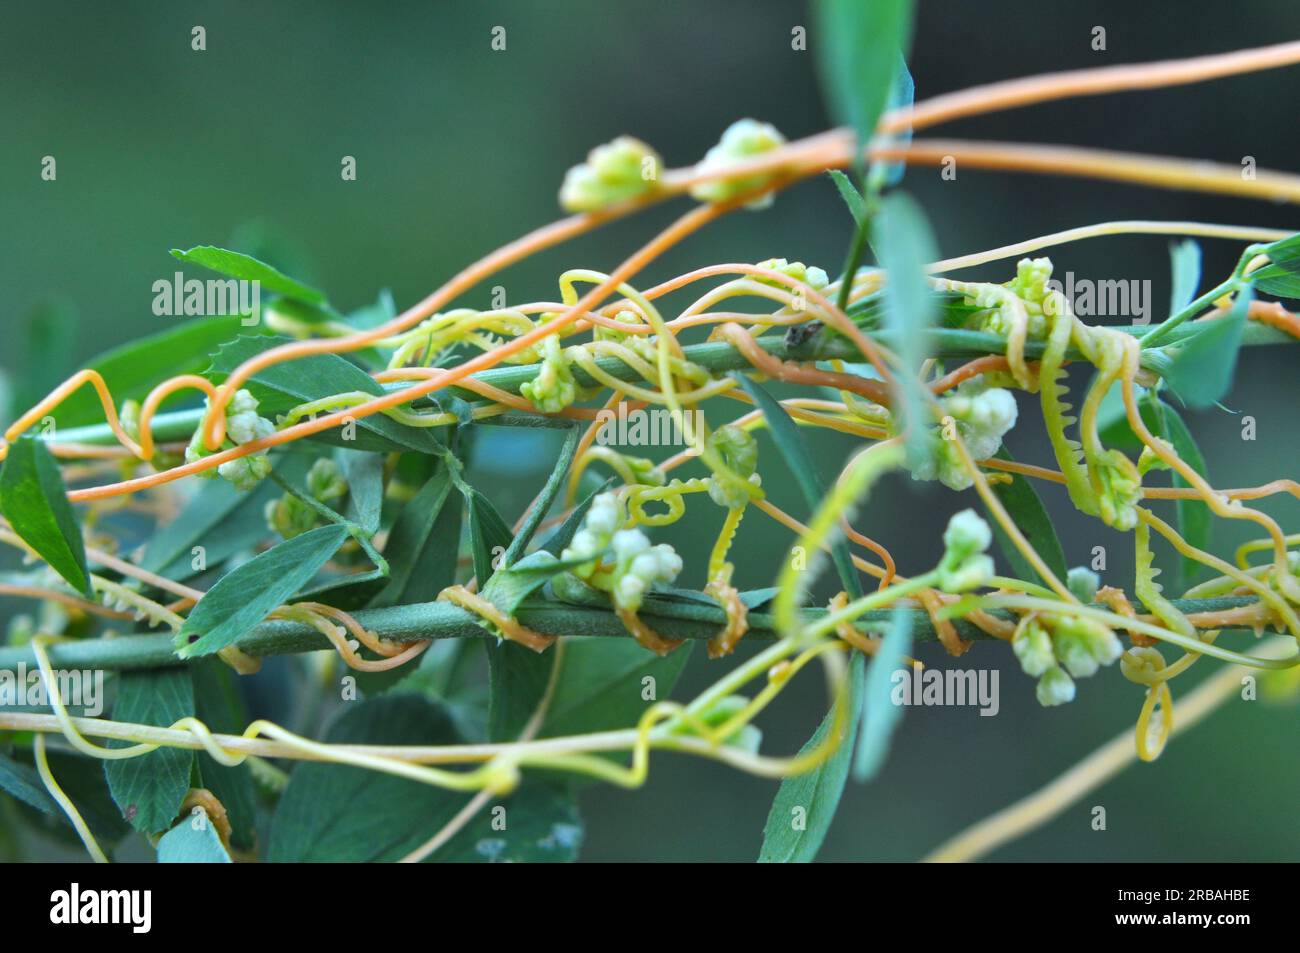 The parasitic plant uscuta grows in the field among crops Stock Photo